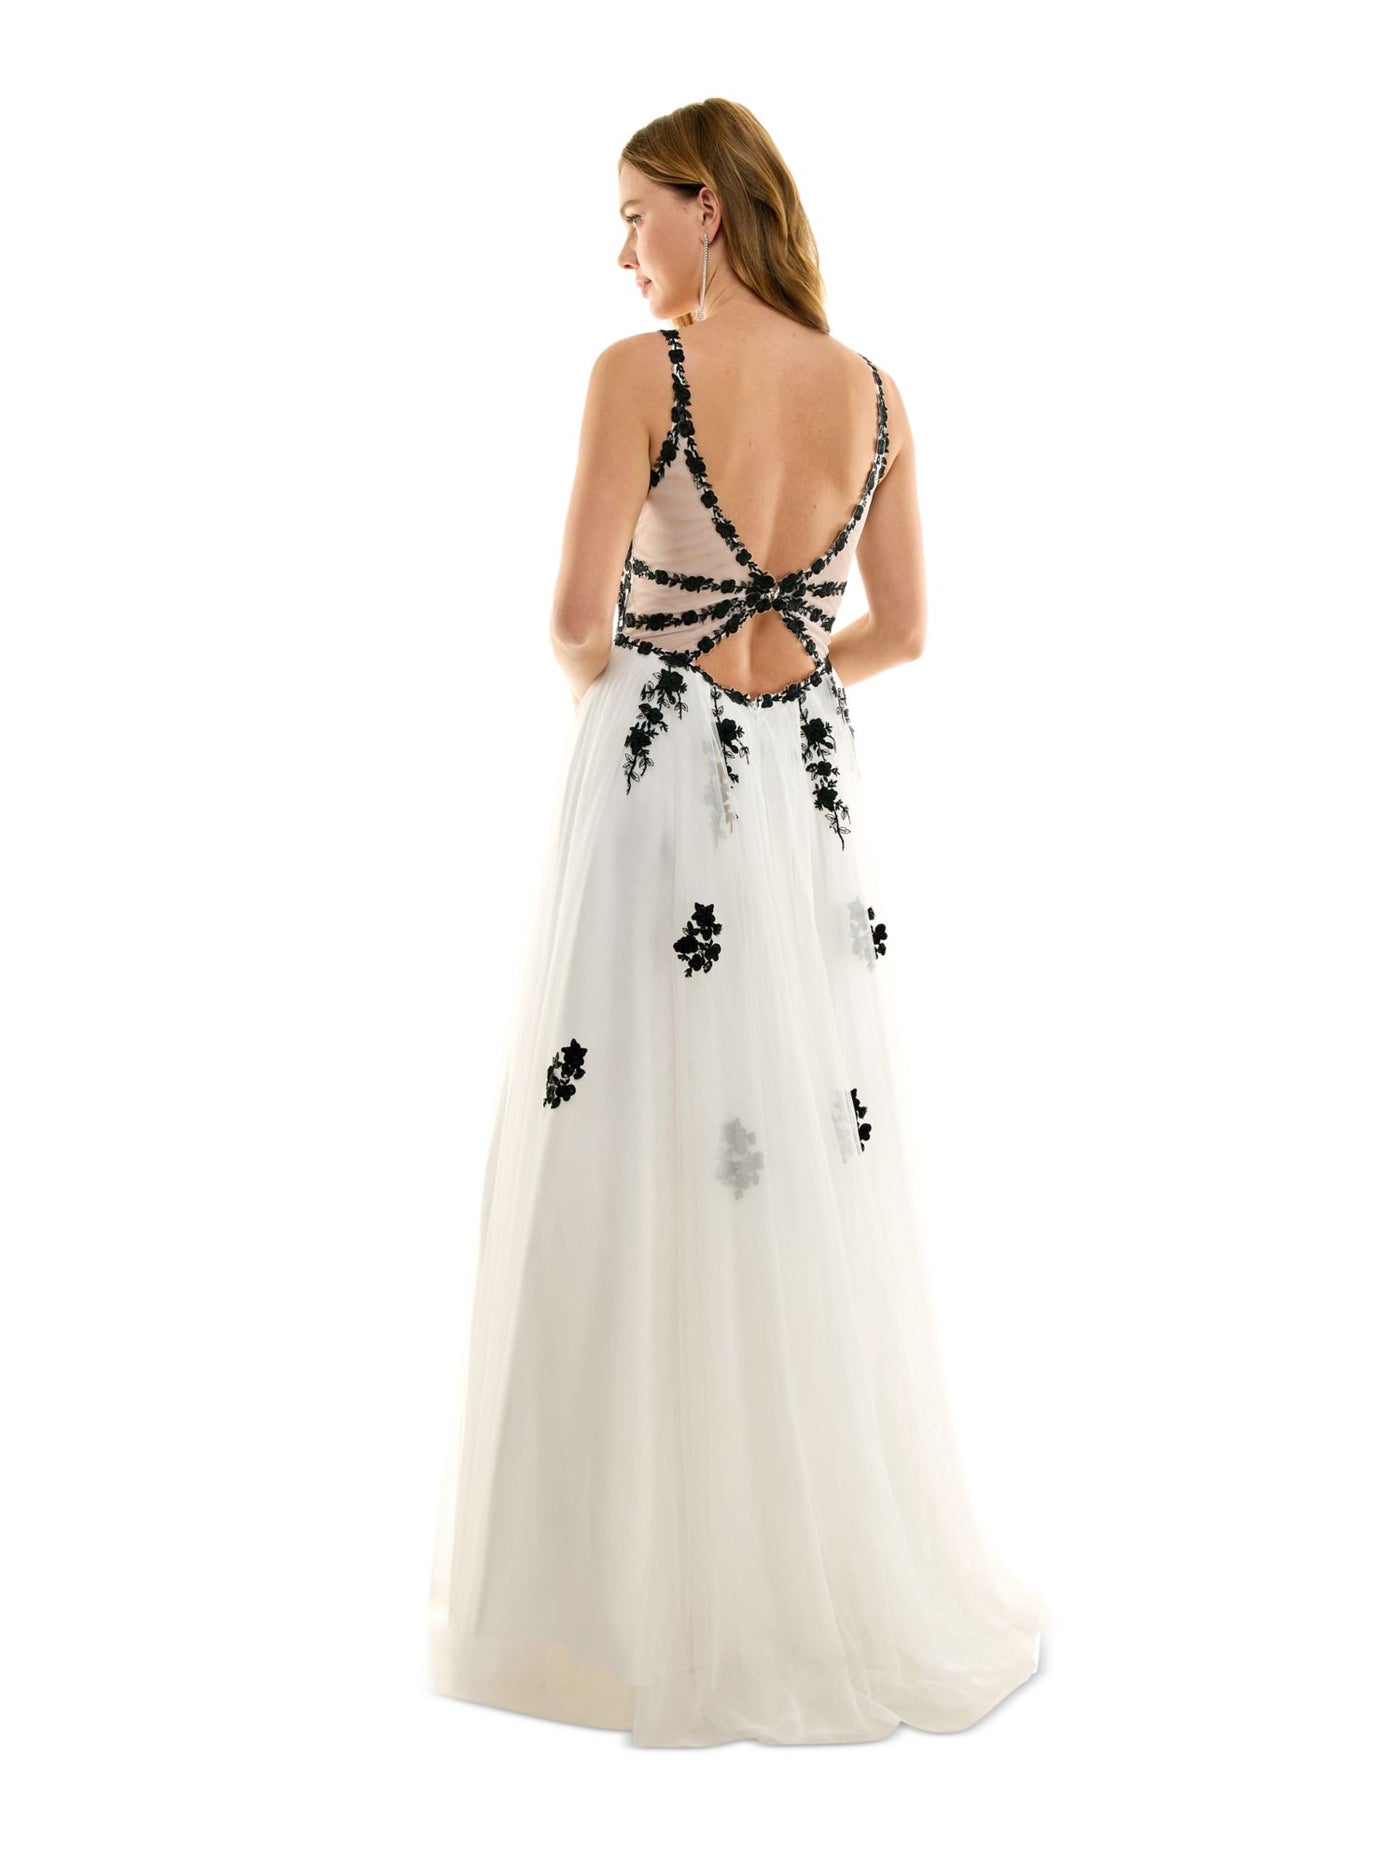 SAY YES TO THE PROM Womens White Embellished Zippered Cutout Tulle Mesh Sheer Lined Floral Spaghetti Strap V Neck Full-Length Formal Gown Dress Juniors 5\6